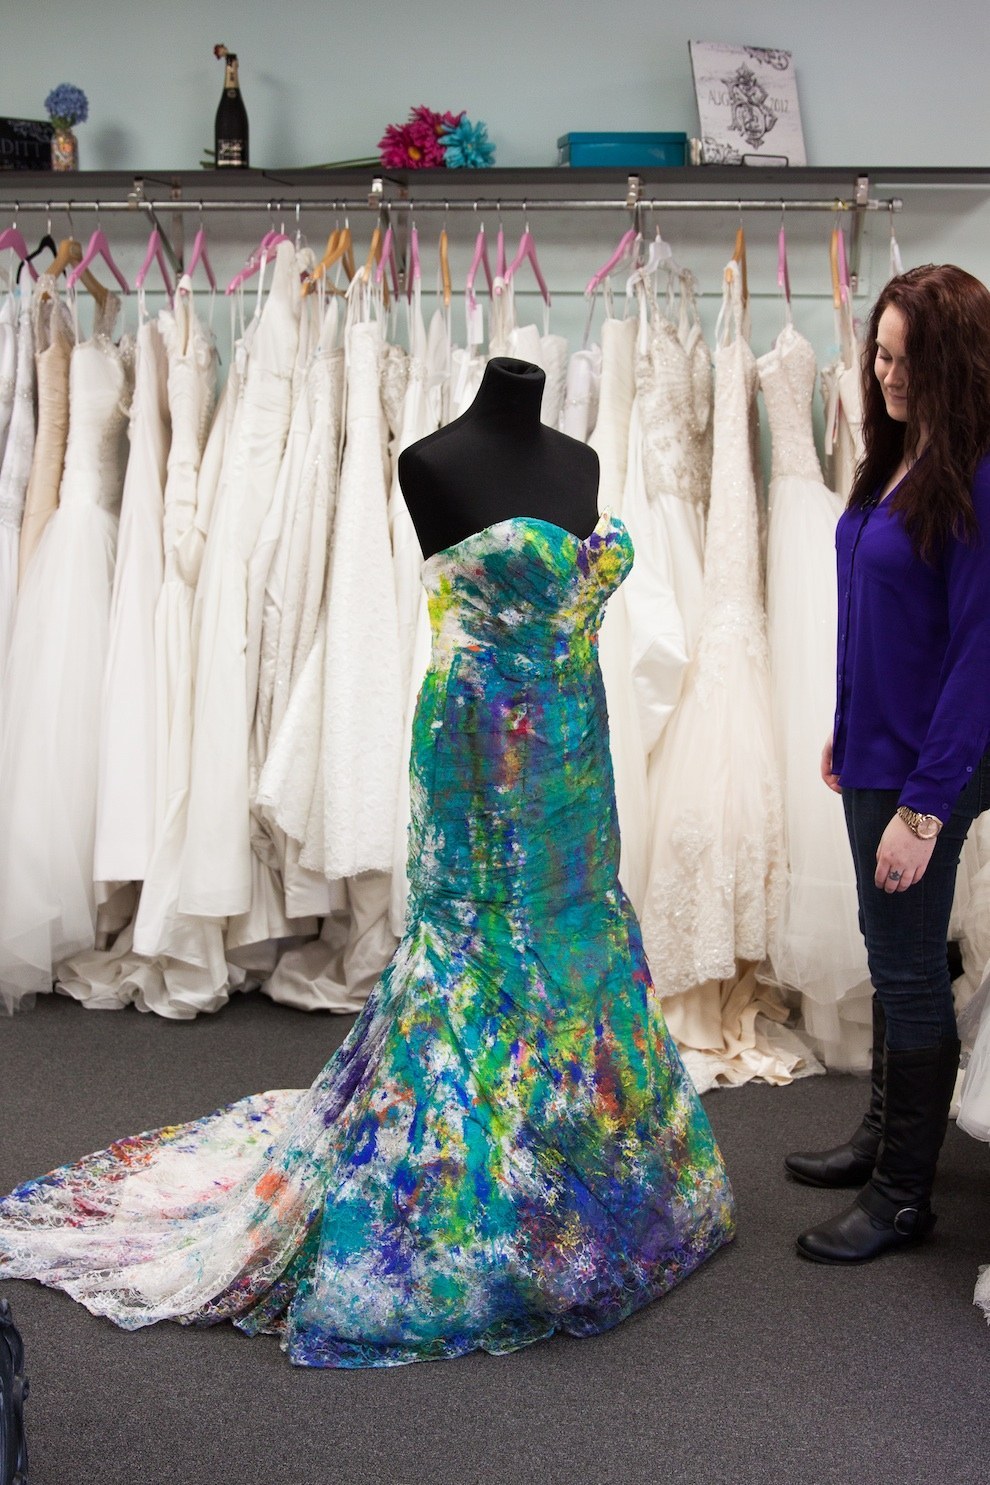 Swink’s dress is also being displayed in a local bridal shop in Memphis through the beginning of January. A portion of the proceeds from each dress bought while it's on display are going to a local nonprofit called Be Free Revolution.